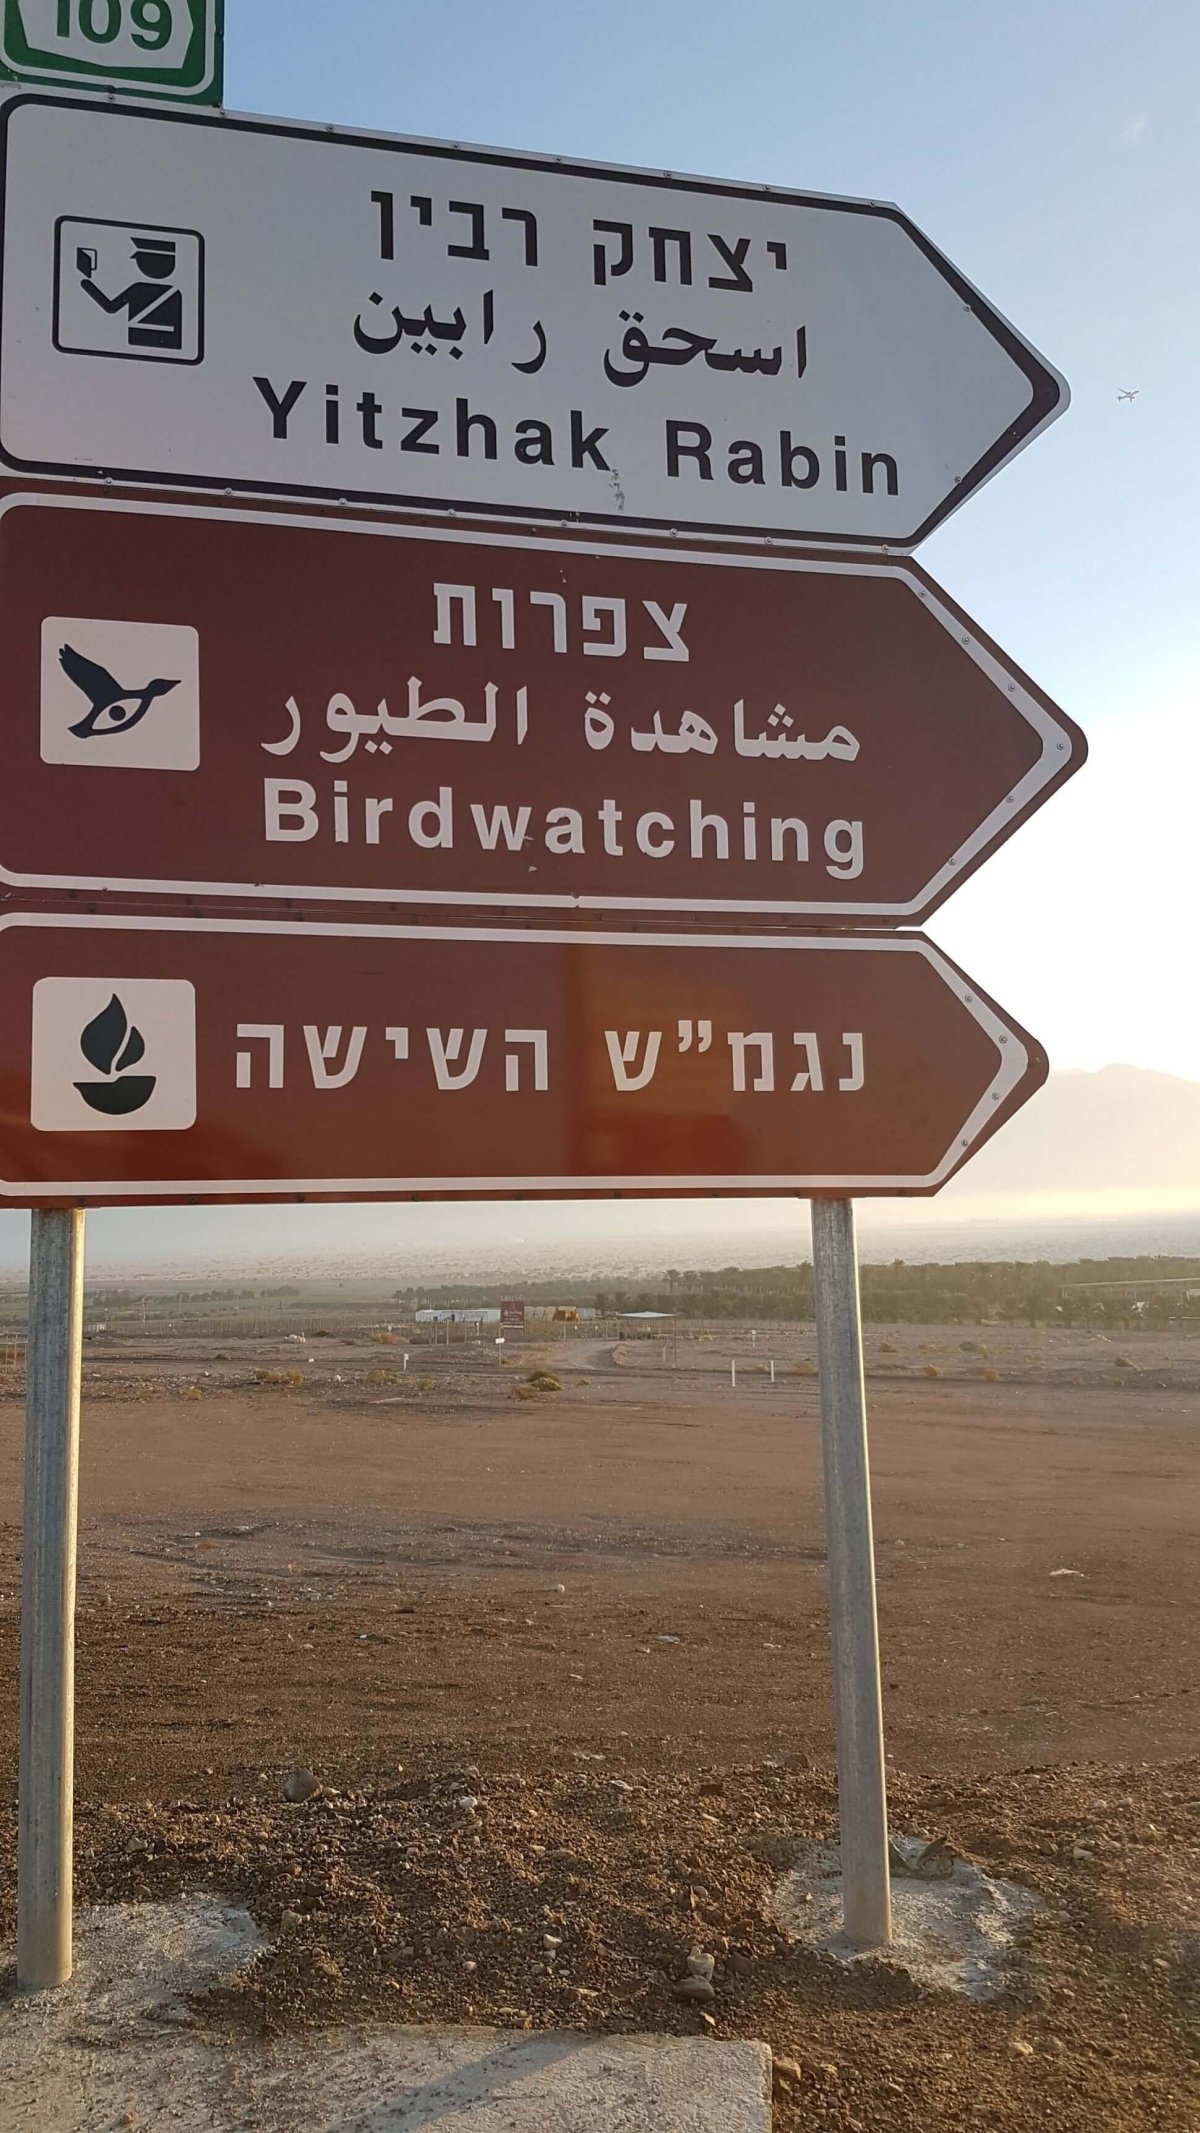 borders & birdwatching (just in case you wait for a while)